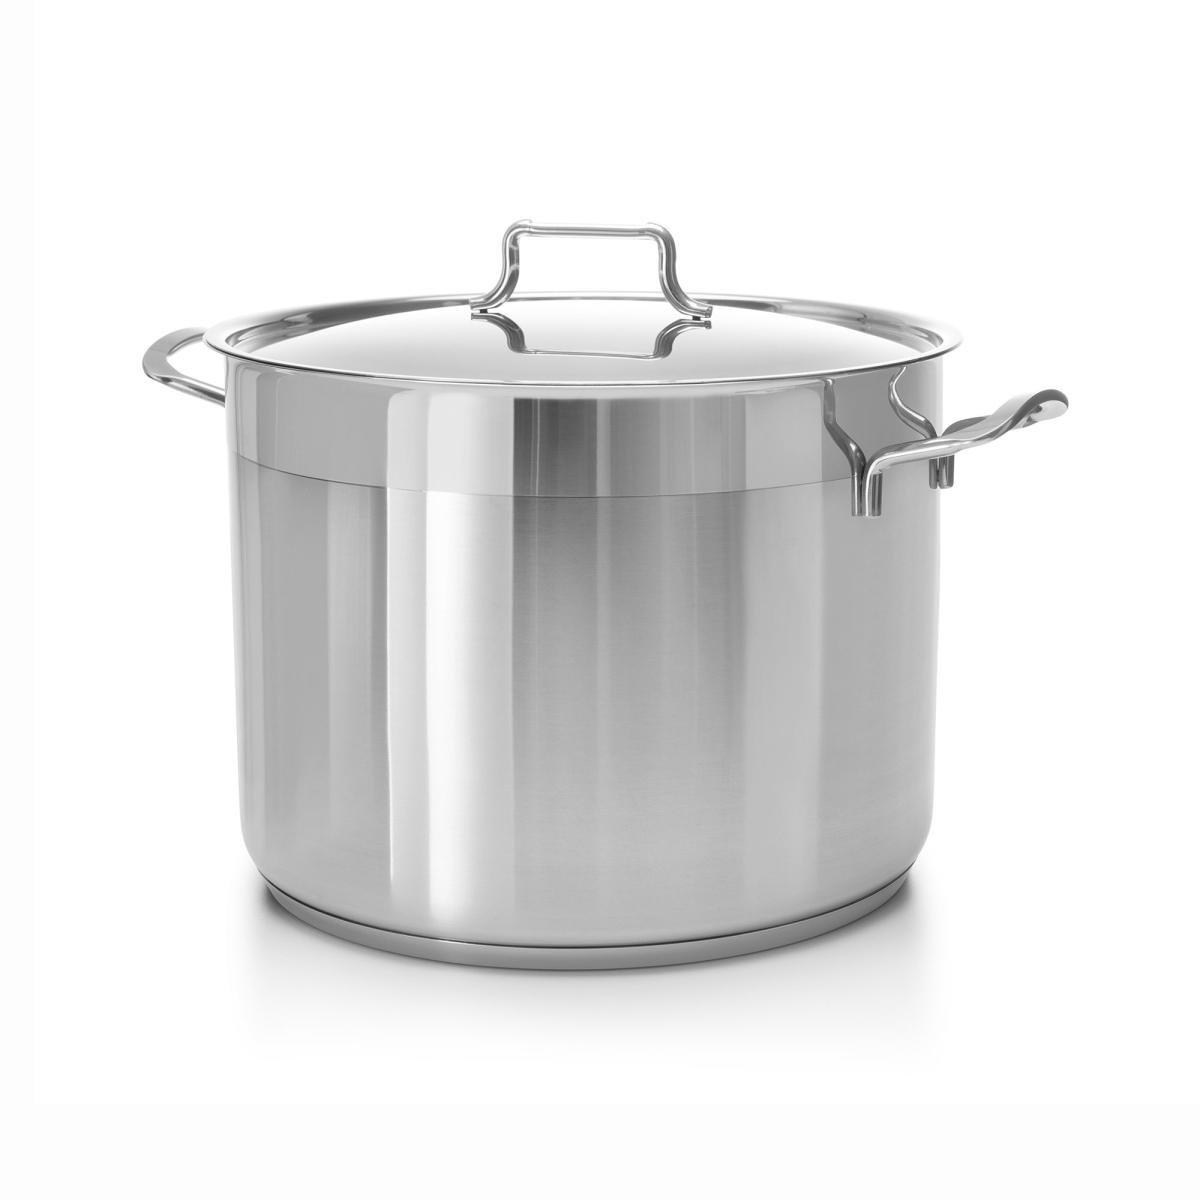 H16 16 Qt. Classic 18 By 10 Stainless Steel Stockpot Covered In Cookware Induction